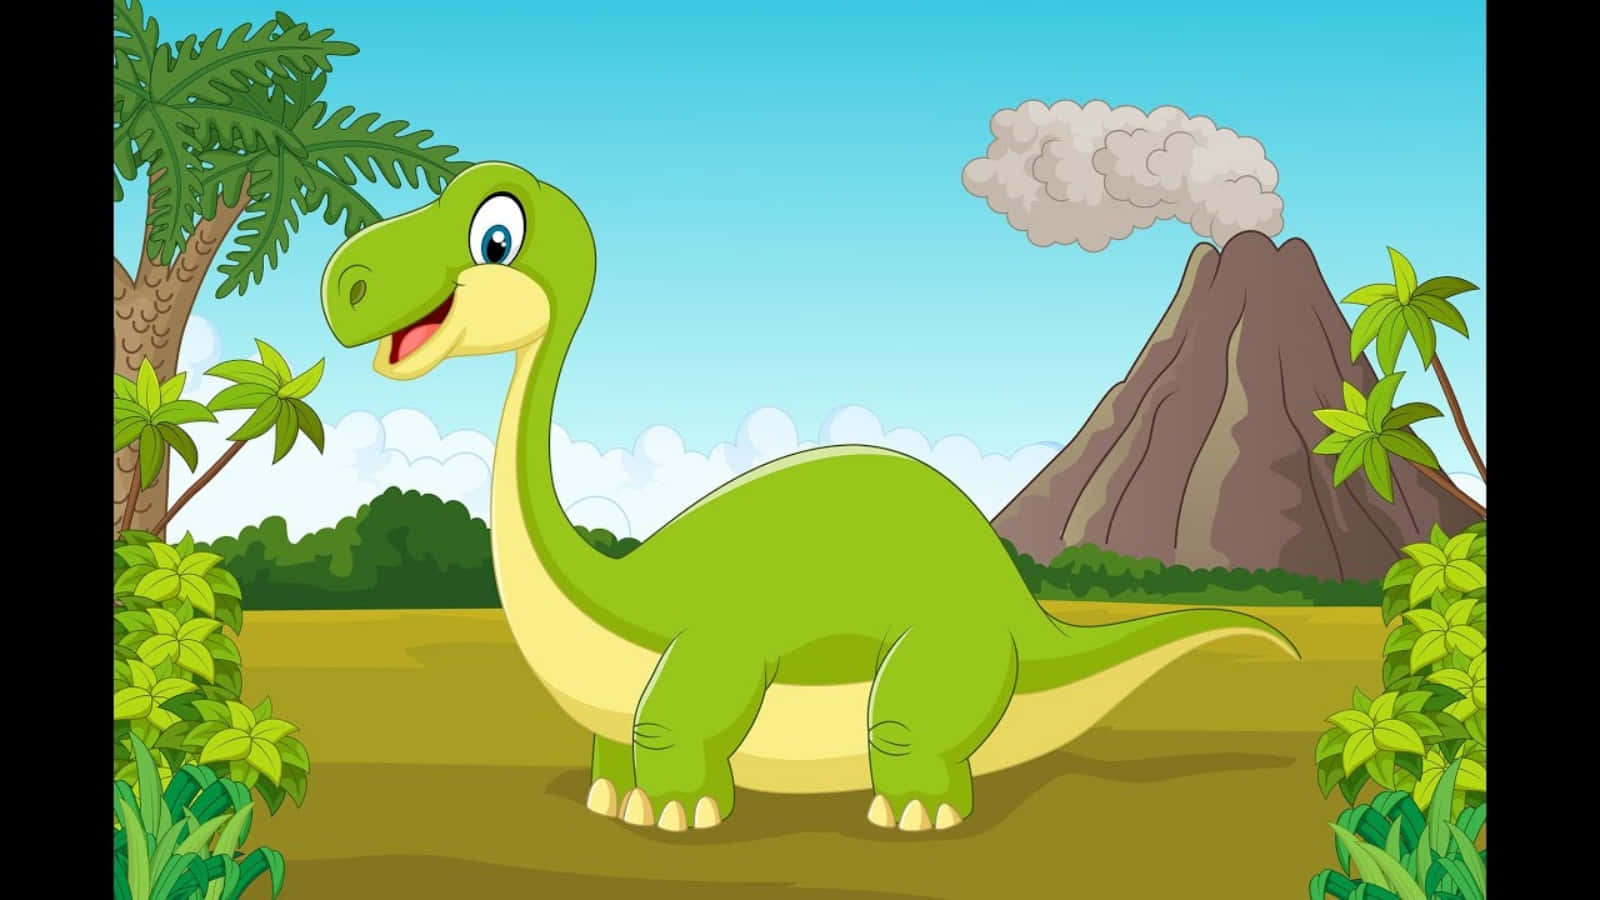 This prehistoric land is more fun with a dinosaur cartoon pal!